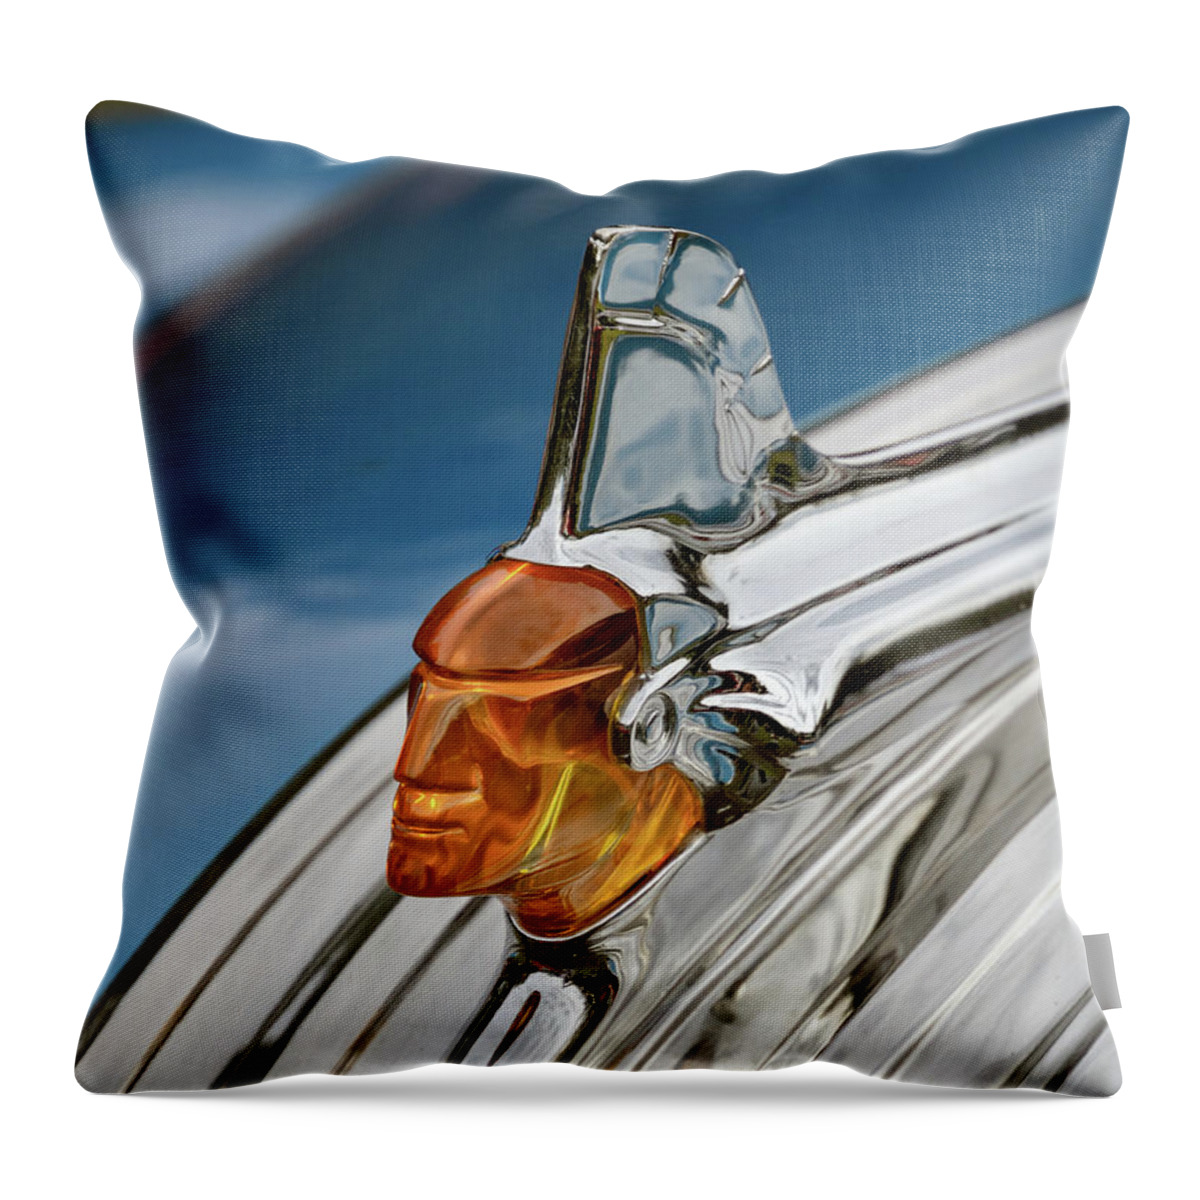 1952 Throw Pillow featuring the photograph 1952 Pontiac Catalina Chieftan Lighted Hood Ornament by Betty Denise